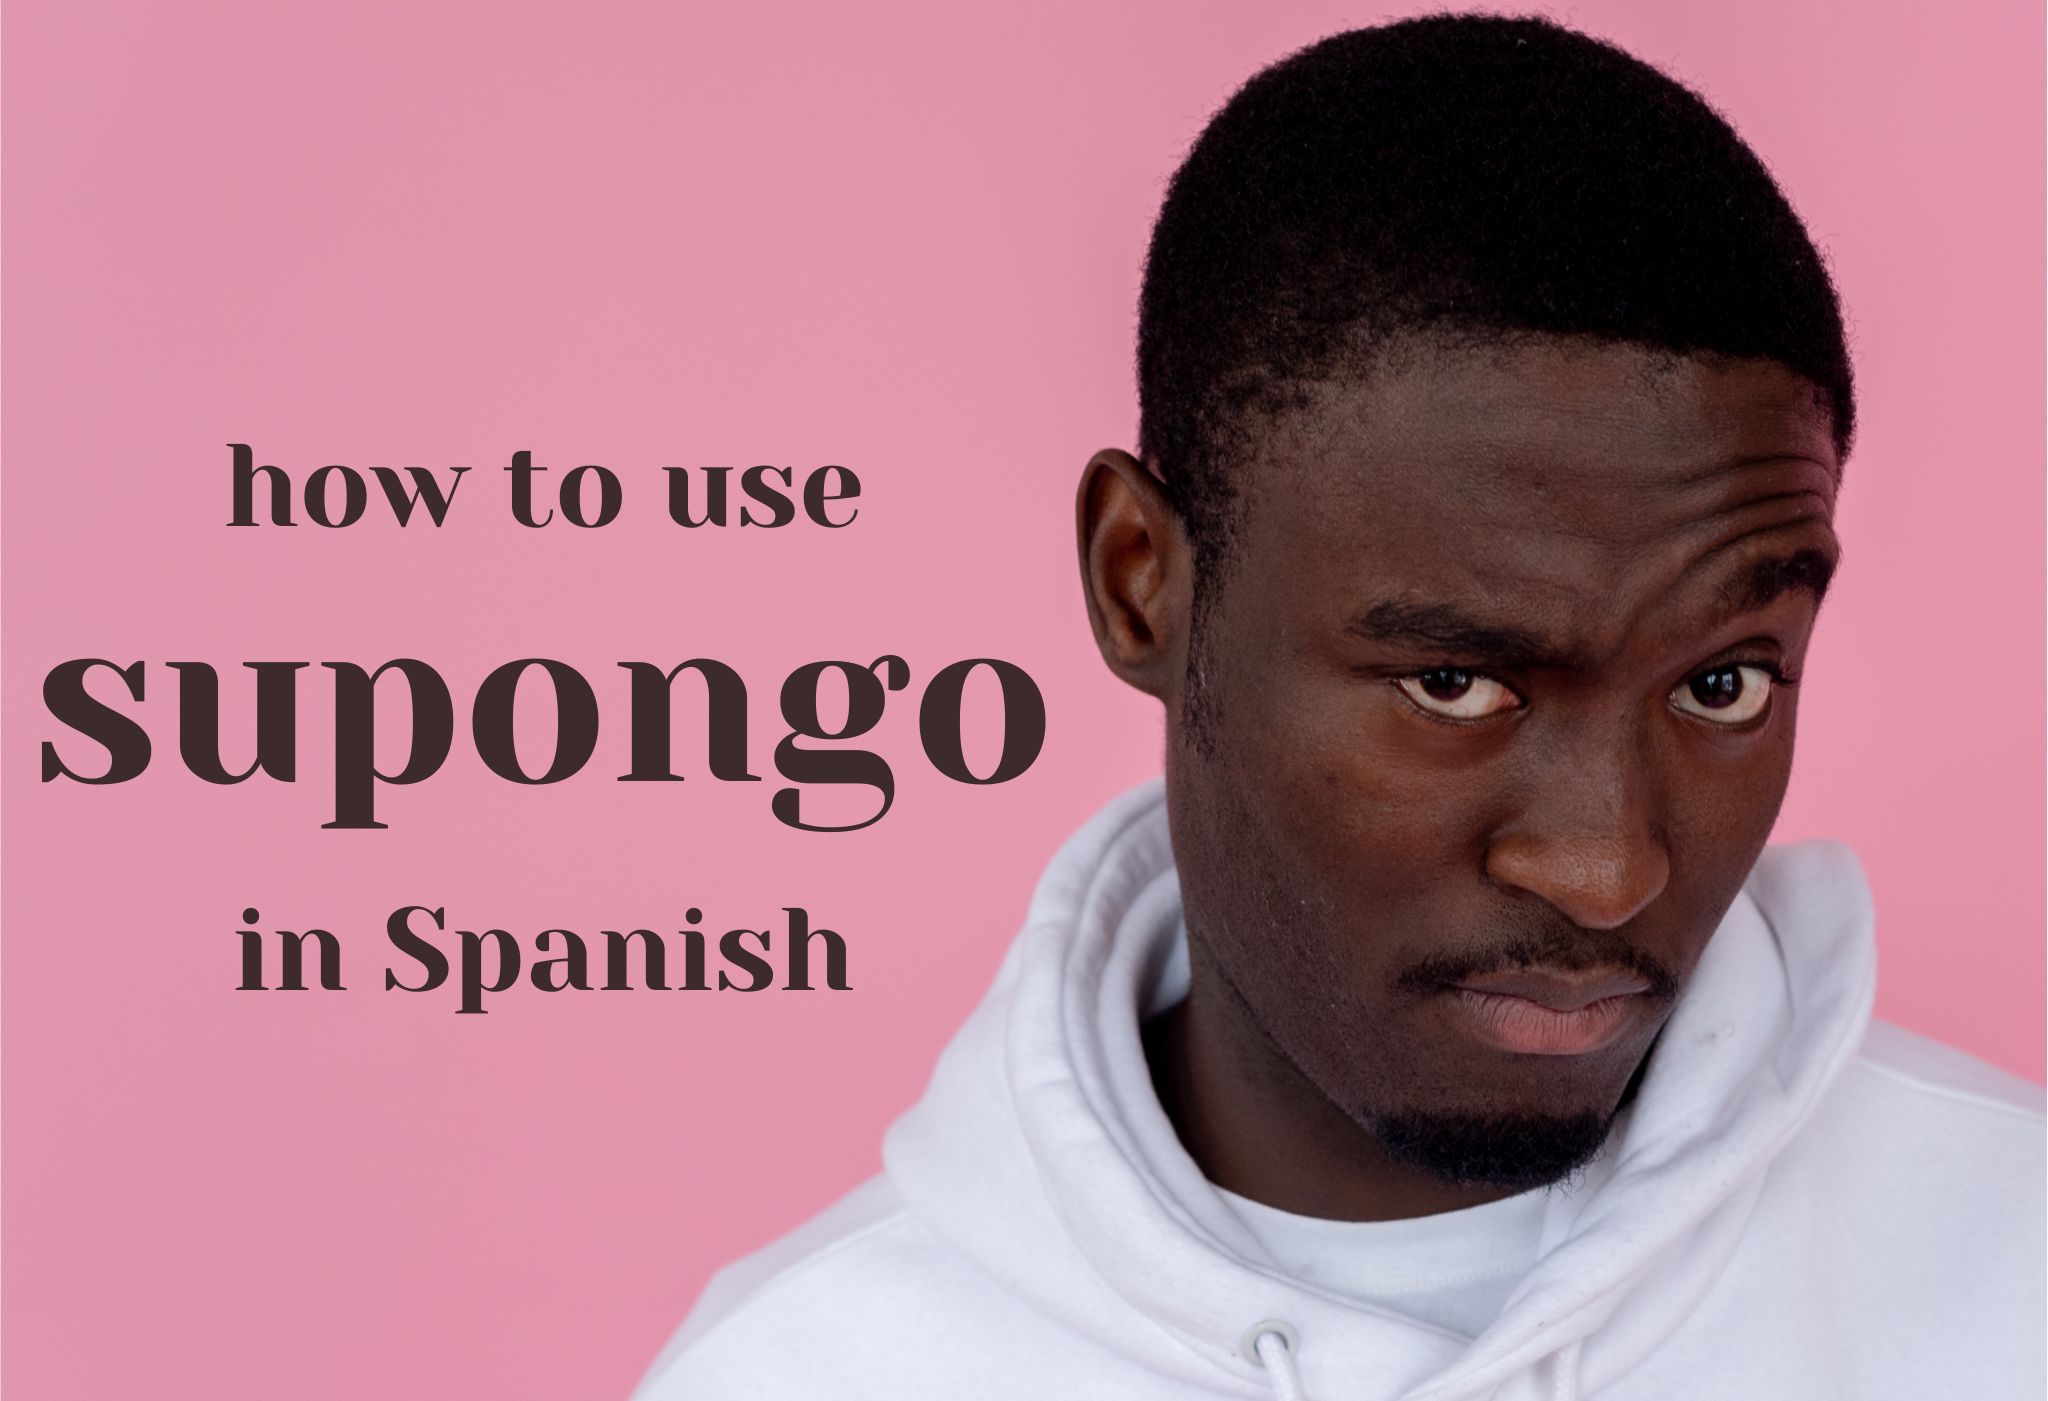 How to use Supongo in Spanish